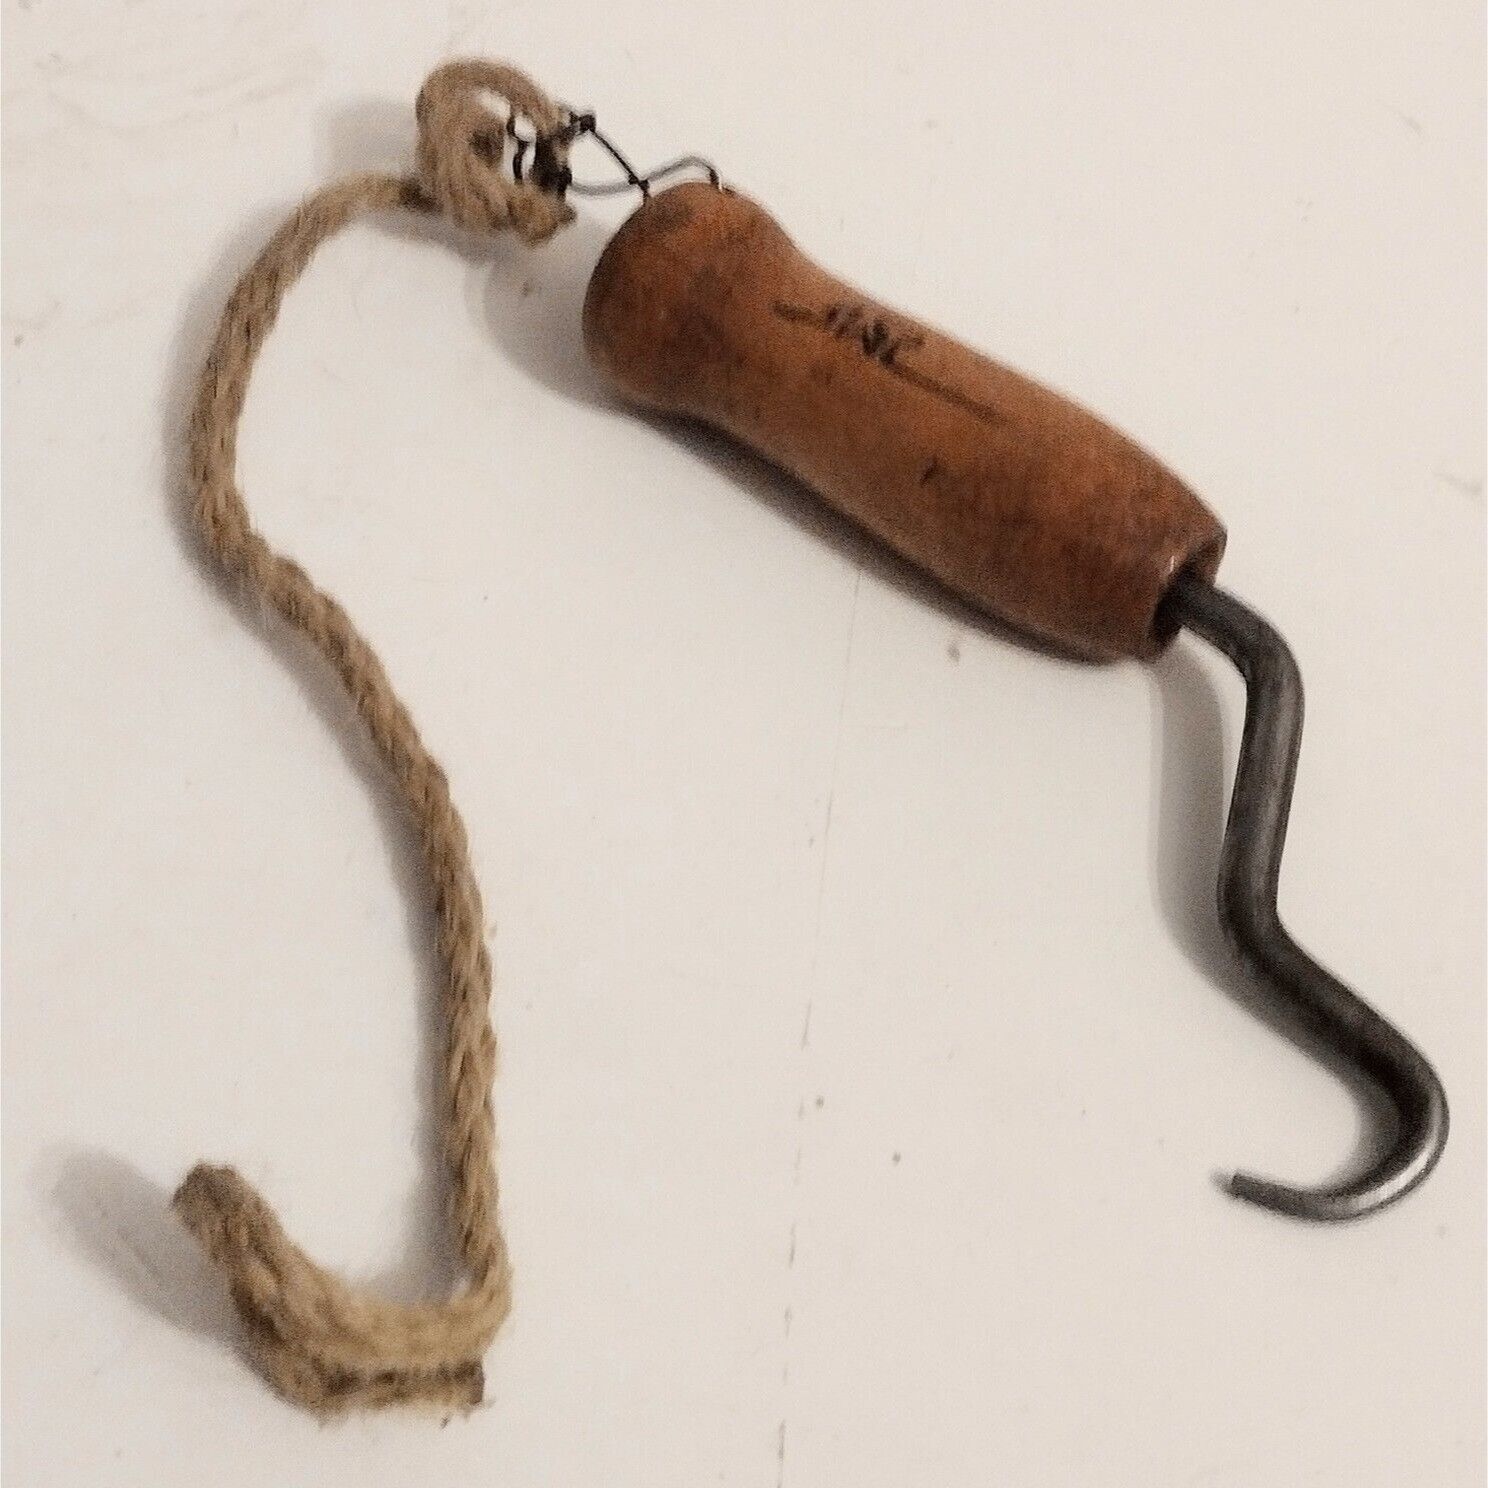 Rebar Tying Tool Antique Wooden Handle Meat Hook With Twine